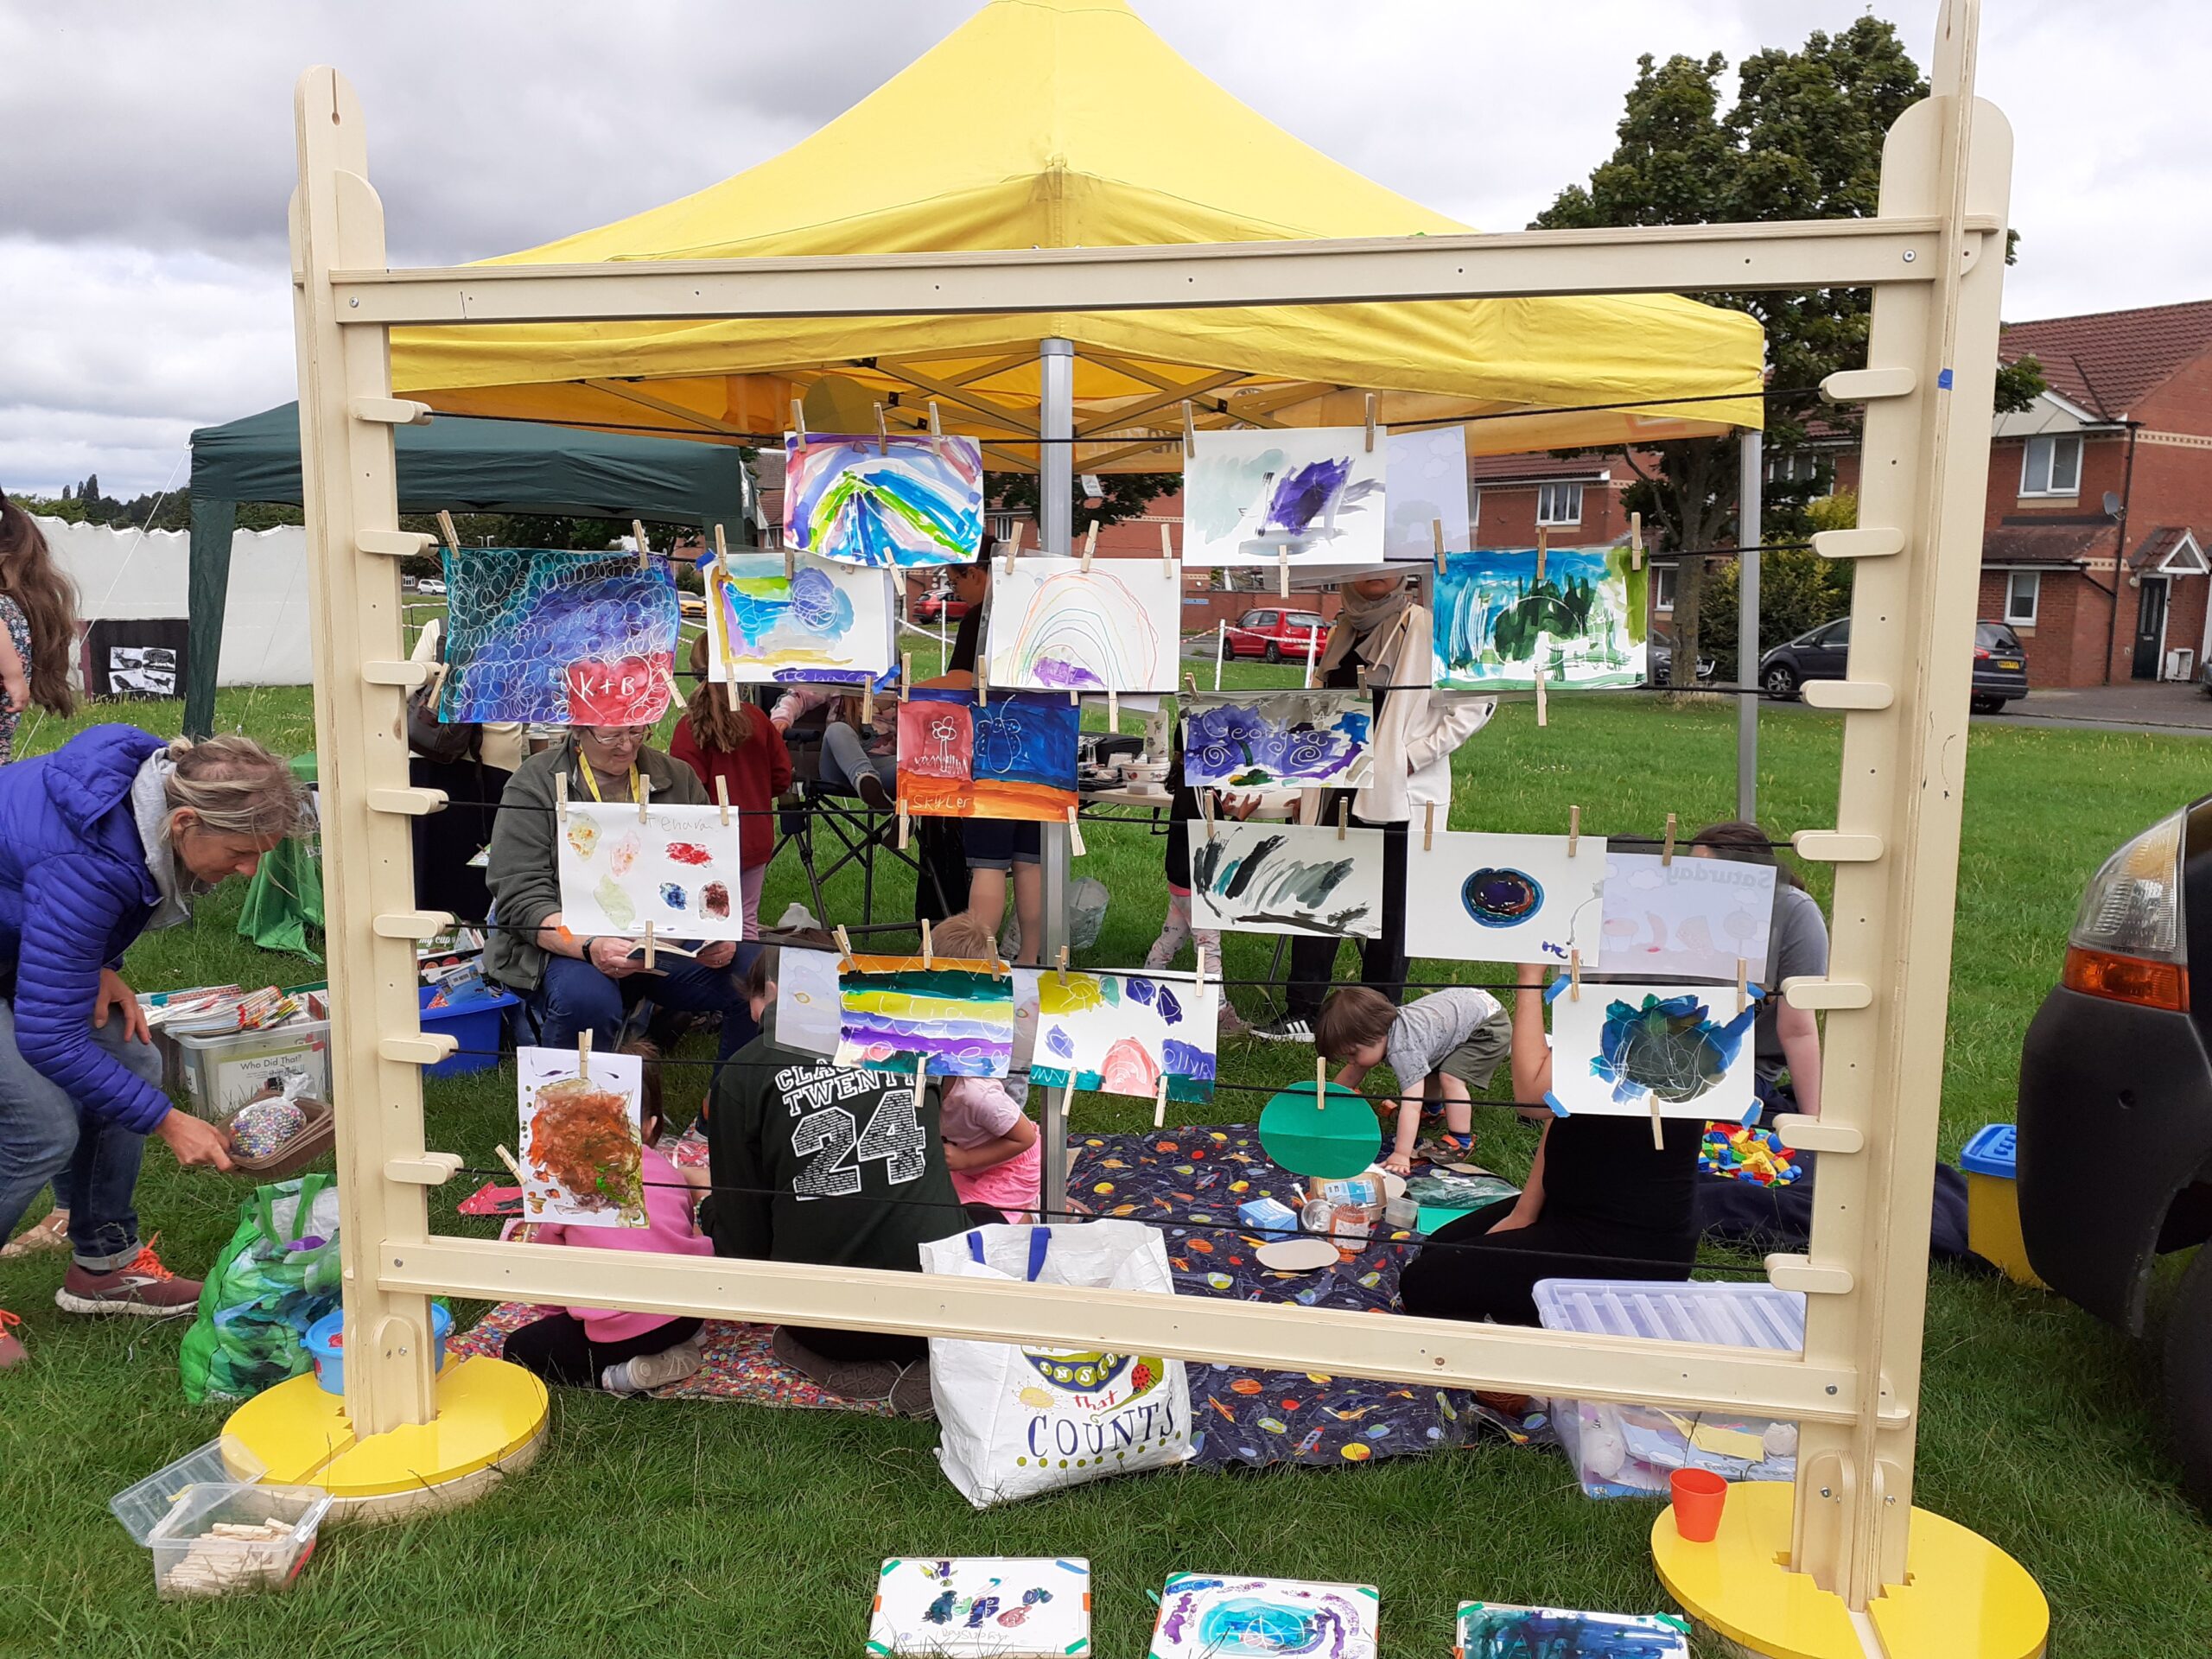 image shows drawings and artwork displayed on a stand in a playground